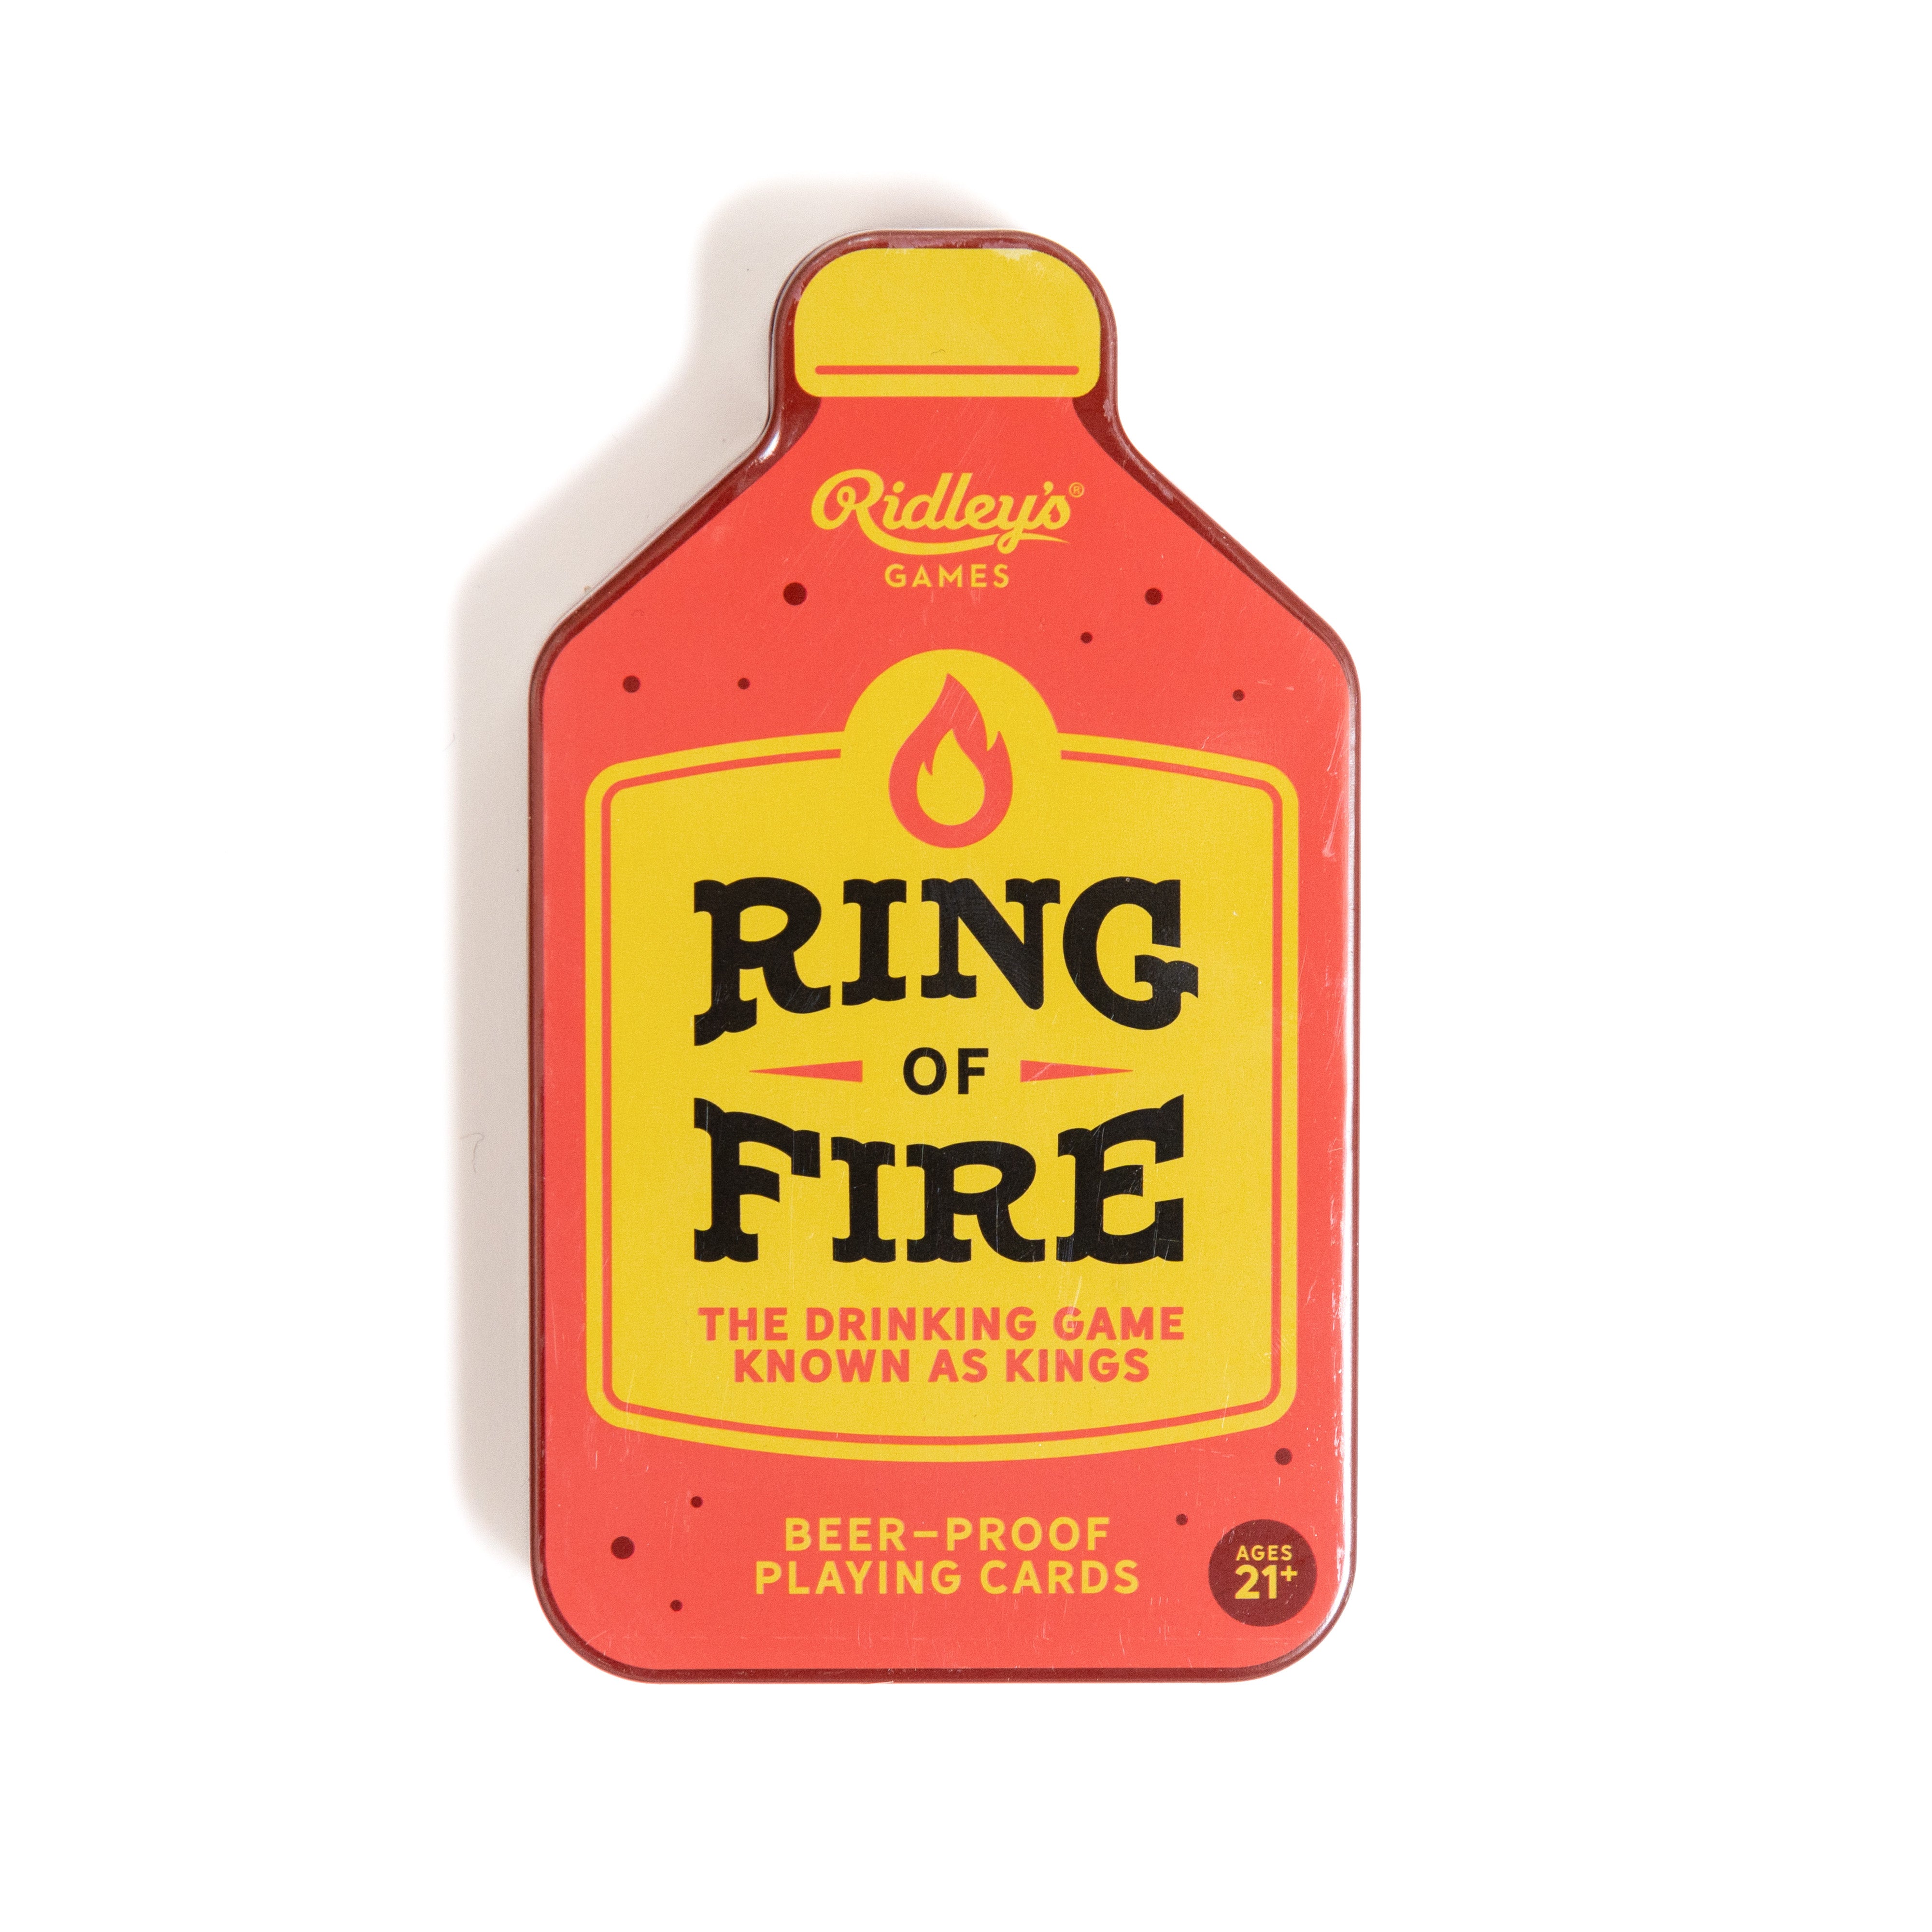 Who needs to play this with you?🤪 #ringoffire #kingscup #drinkinggame... |  TikTok